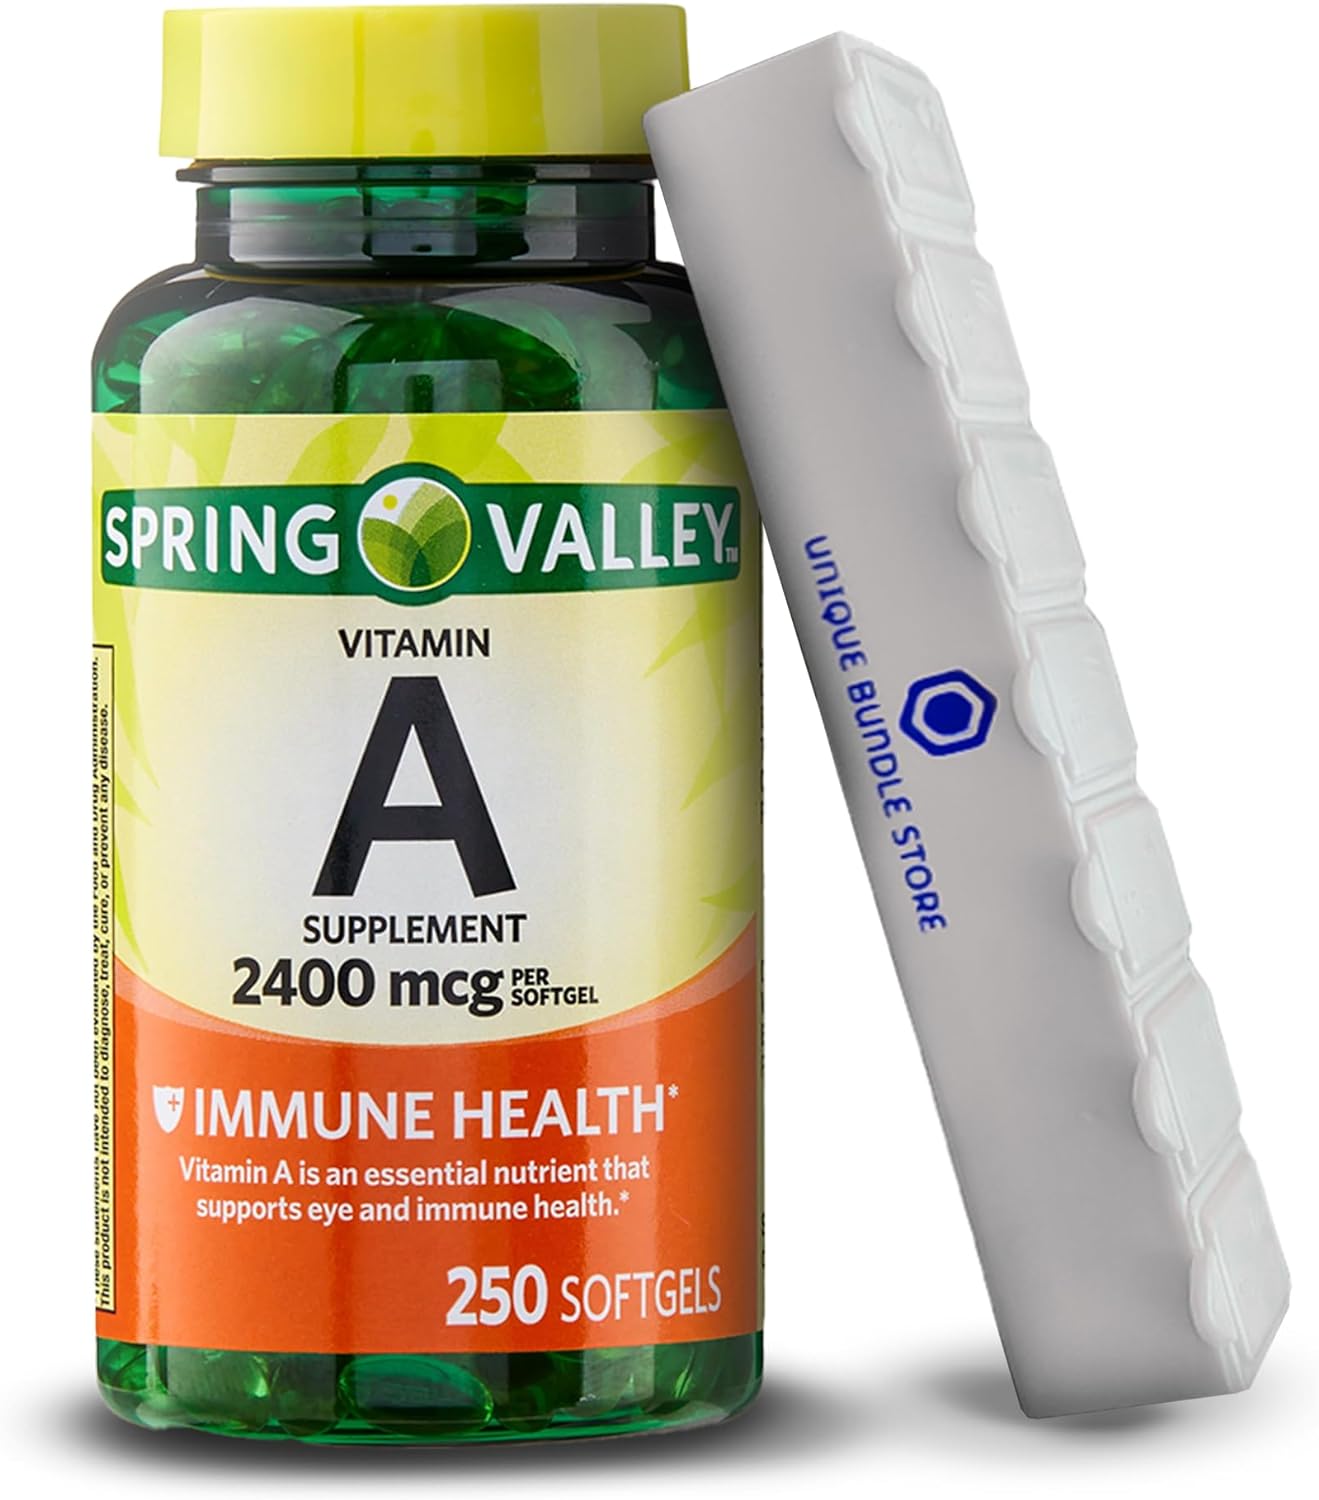 Spring Valley, Vitamin A, Softgels 2400 mcg, Vitamin A Supplement 250 Count + 7 Day Pill Organizer Included (Pack of 1)